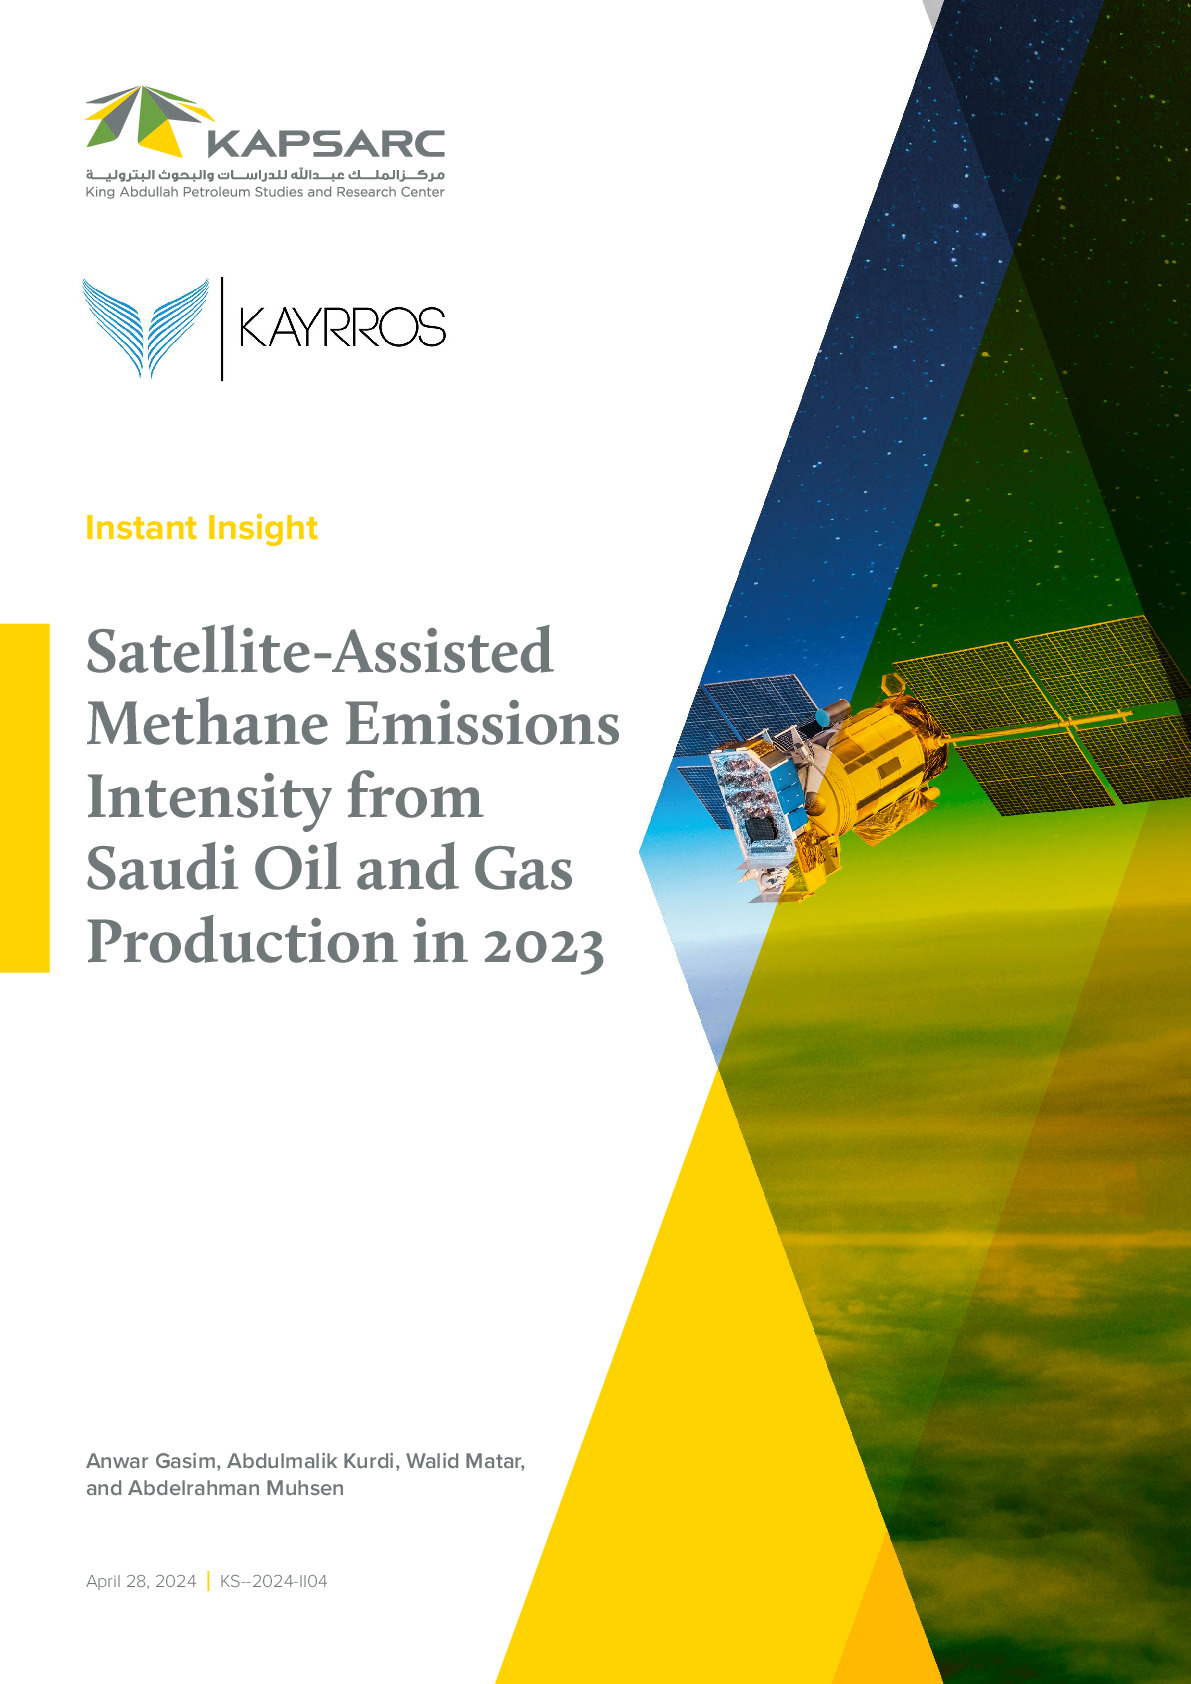 Satellite-Assisted Methane Emissions Intensity from Saudi Oil and Gas Production in 2023